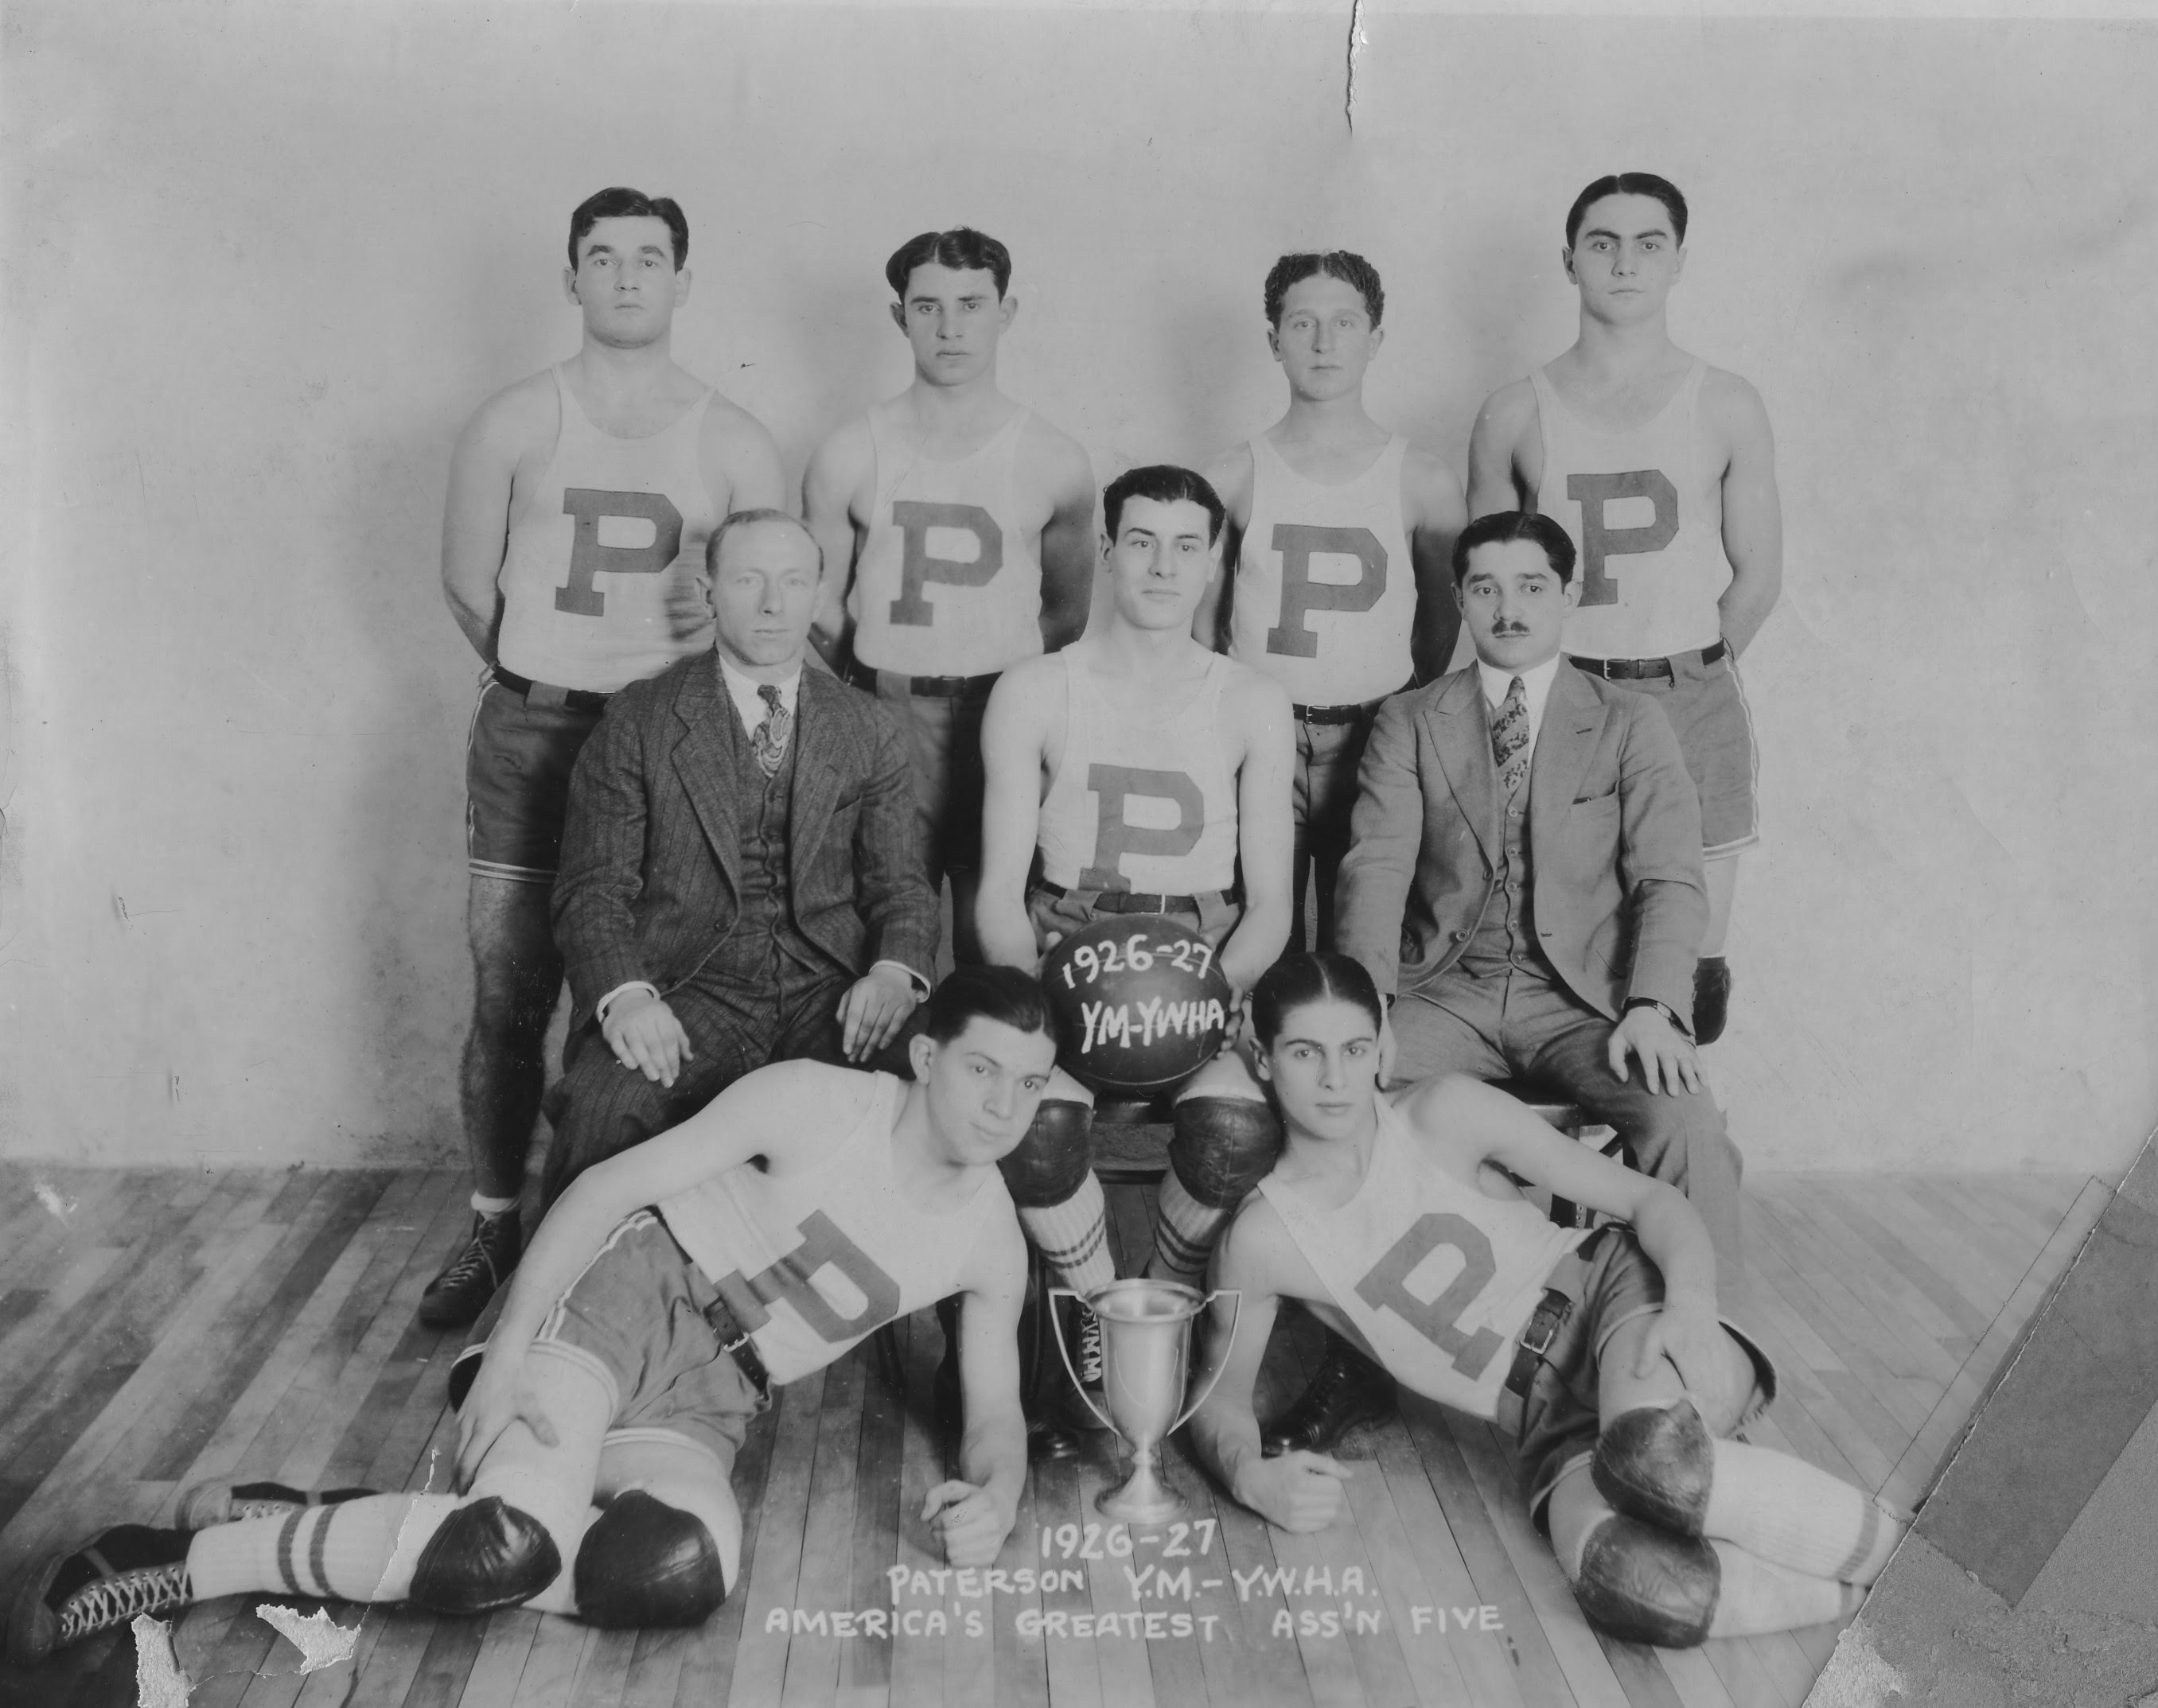 Paterson YM-YWHA 1926-27 American's Greatest Ass'n Five